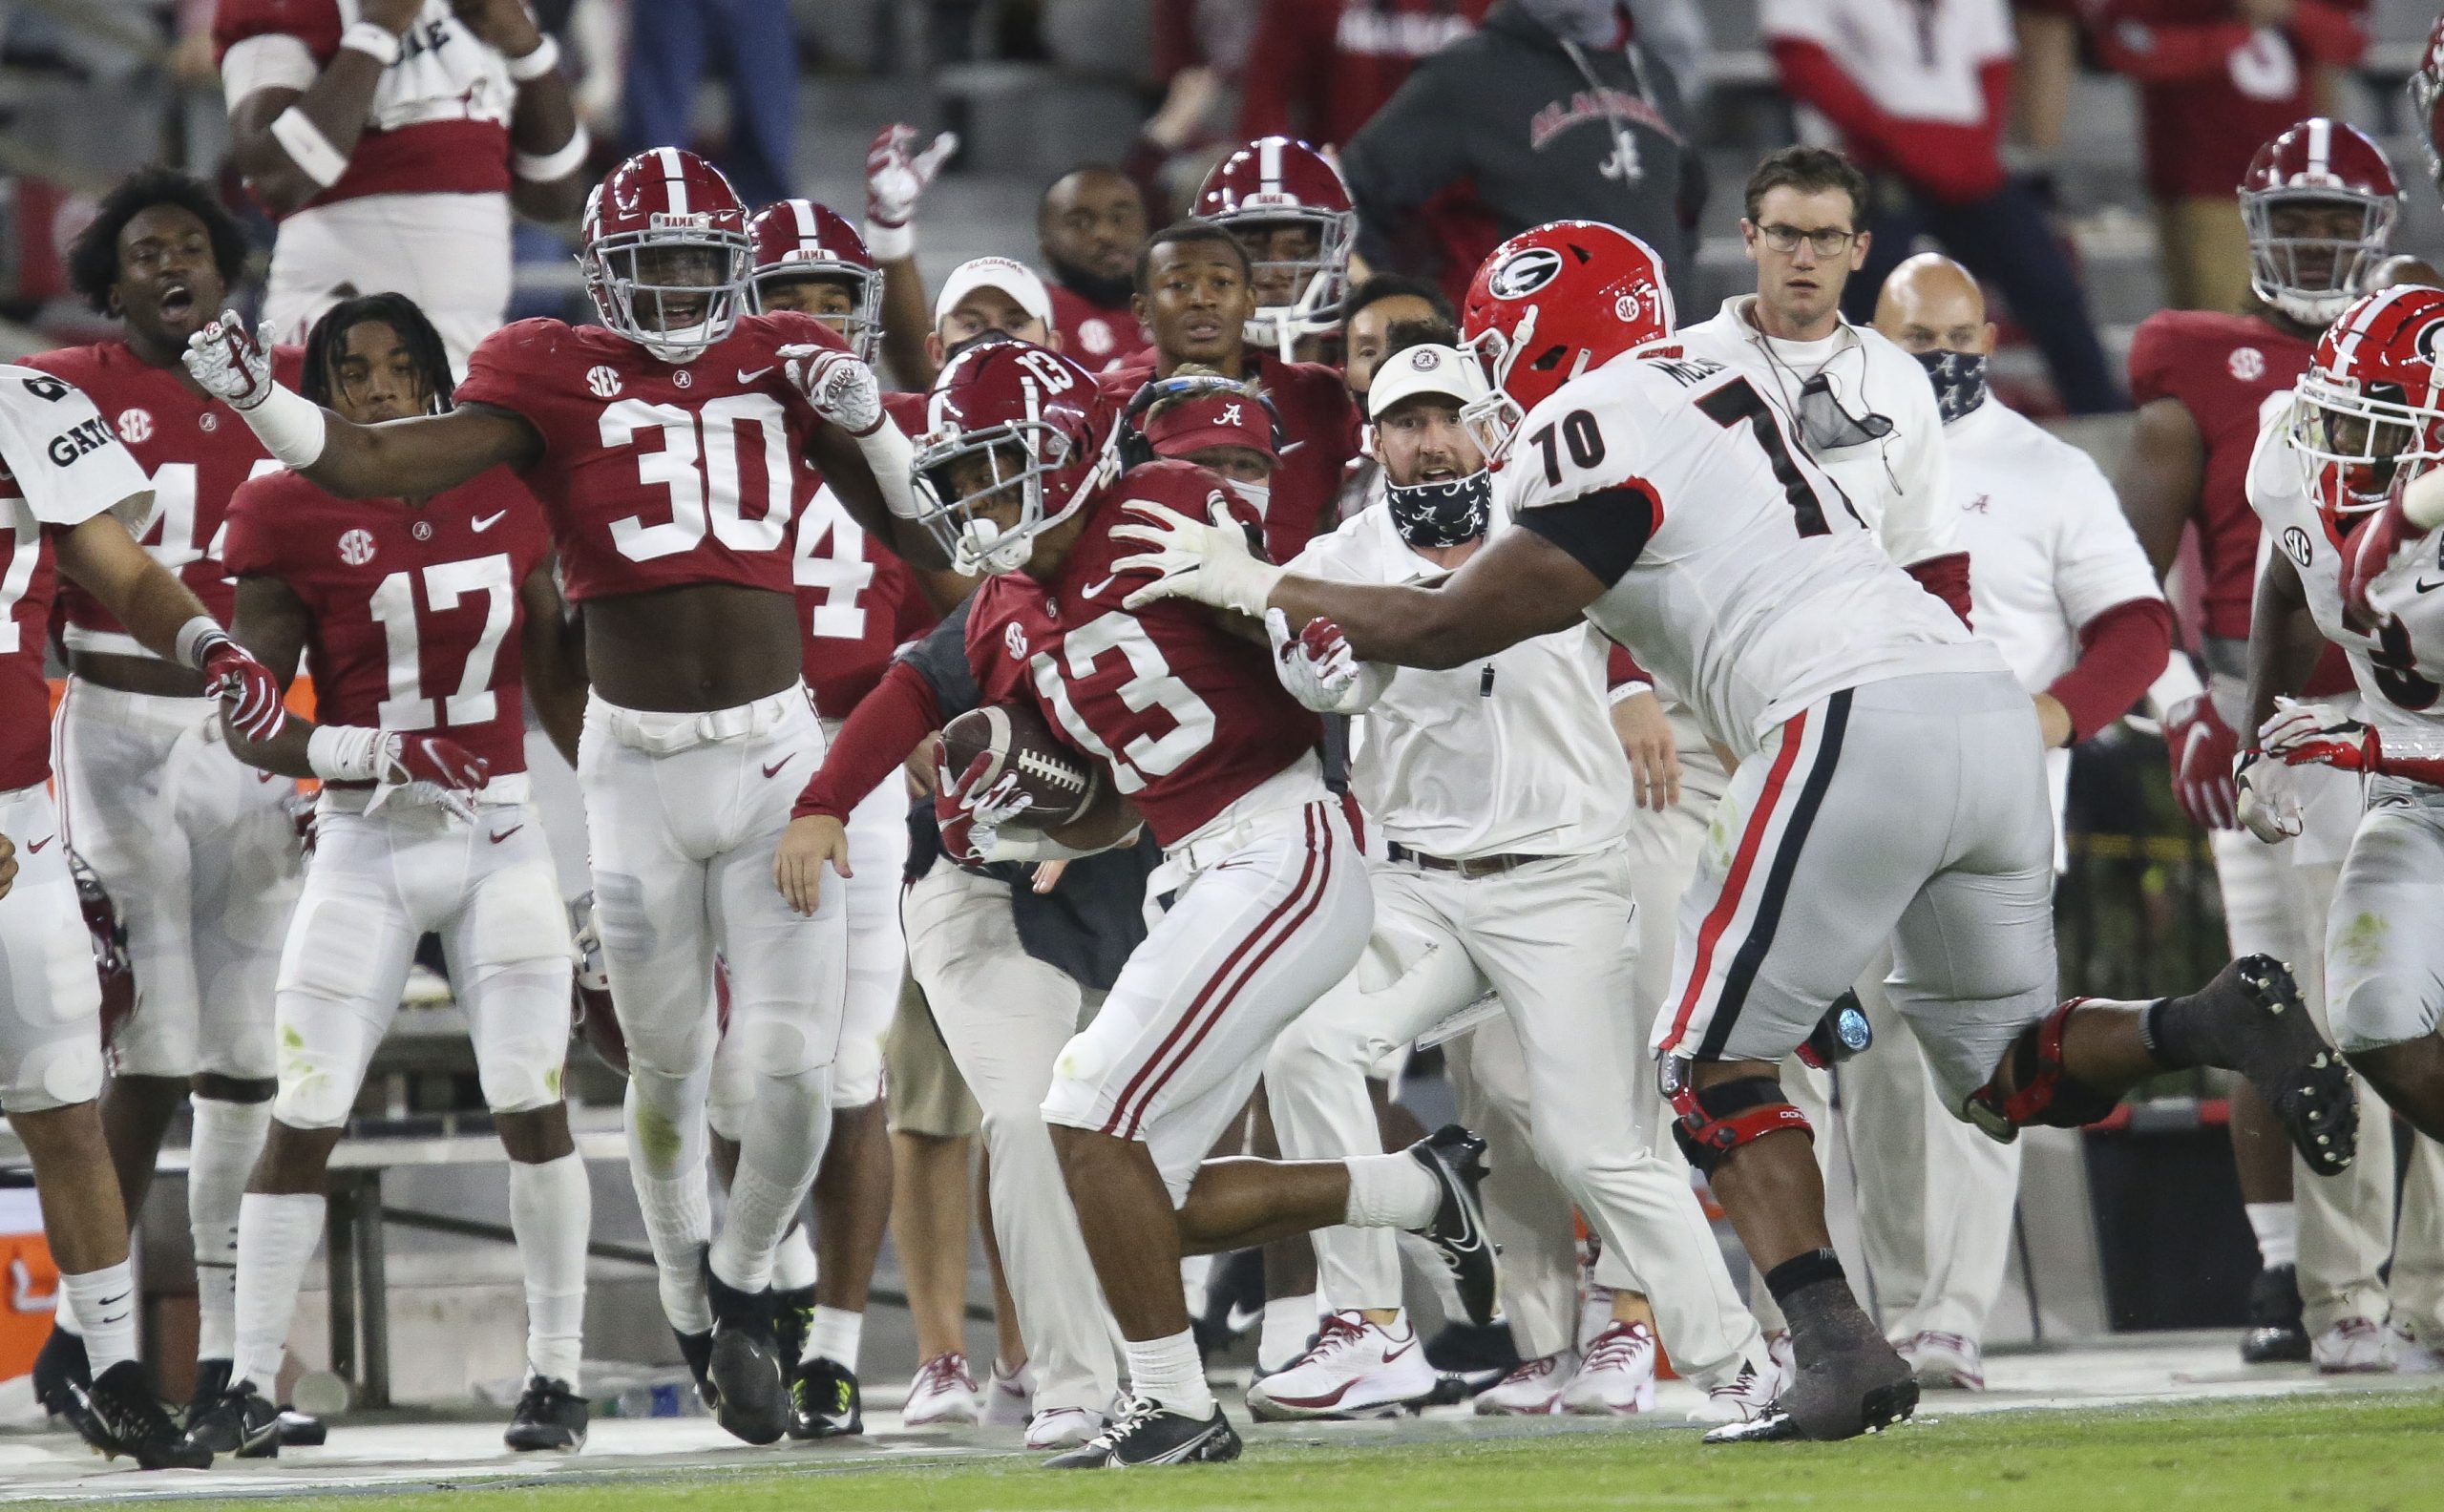 Oct 17, 2020; Tuscaloosa, Alabama, USA; Georgia offensive lineman Warren McClendon (70) forces Alabama defensive back Malachi Moore (13) out of bounds after Moore intercepted a pass during the second half of Alabama's 41-24 win over Georgia at Bryant-Denny Stadium.